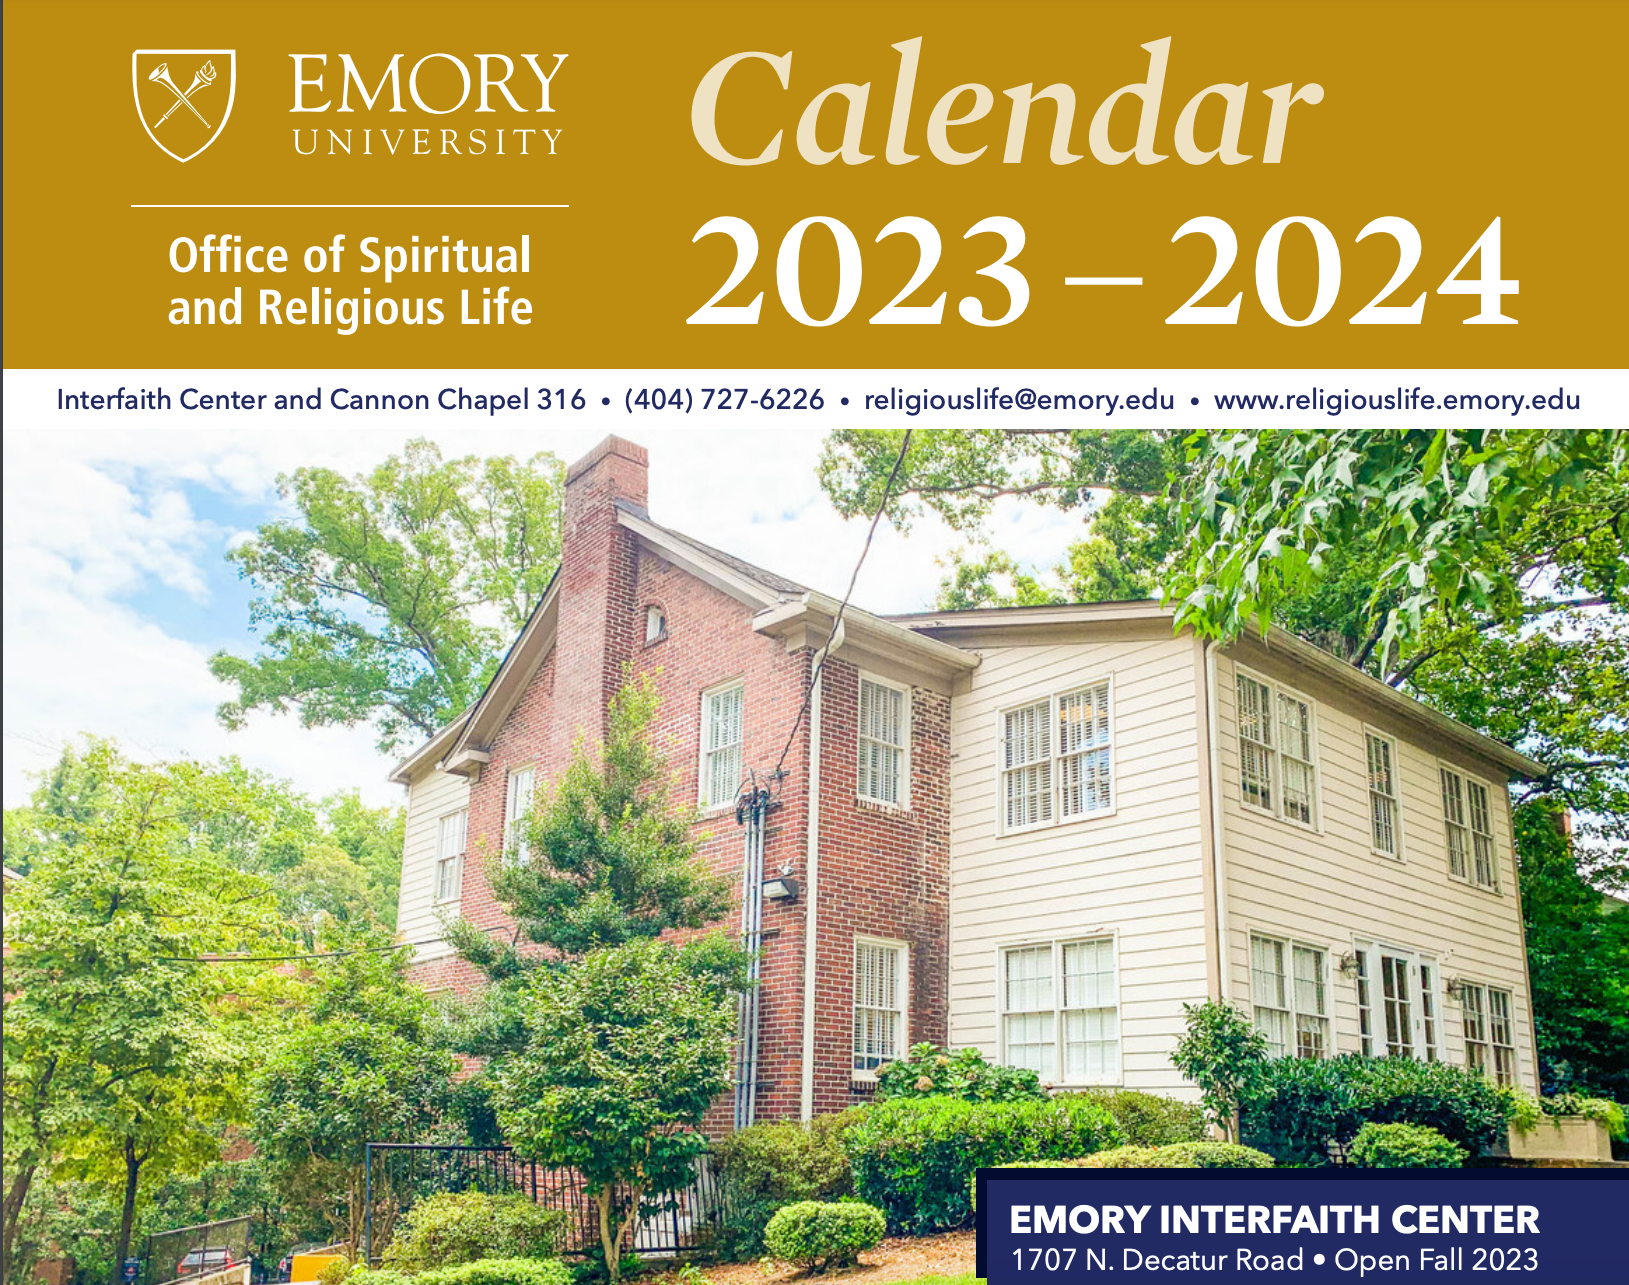 ORSL 2023-2024 Calendar with the Cannon Chapel on the cover